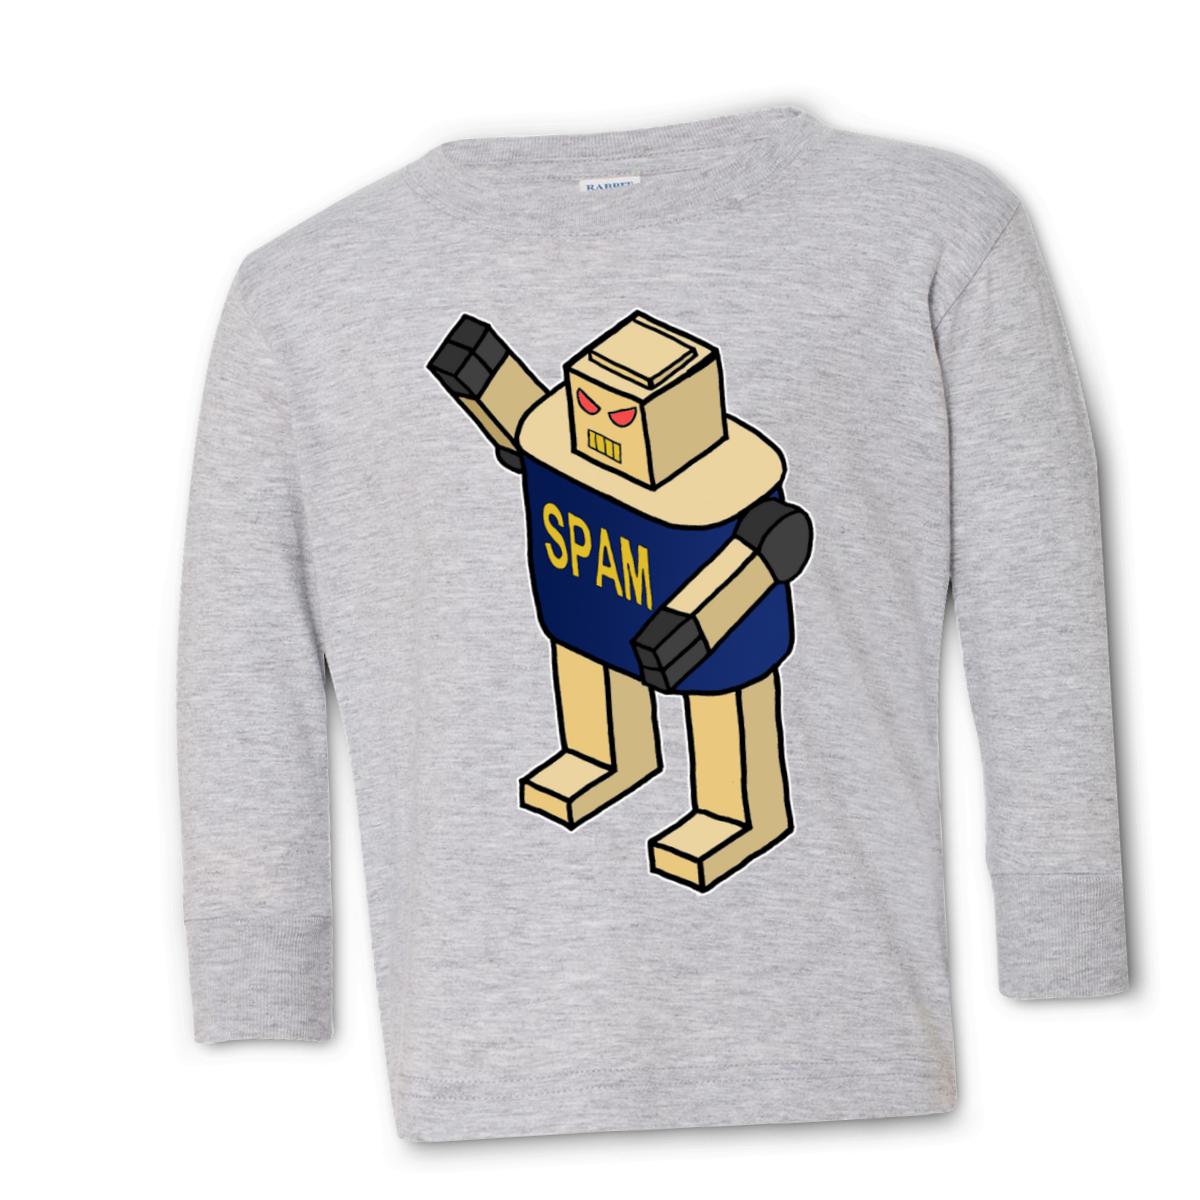 Spam Bot Toddler Long Sleeve Tee 2T heather